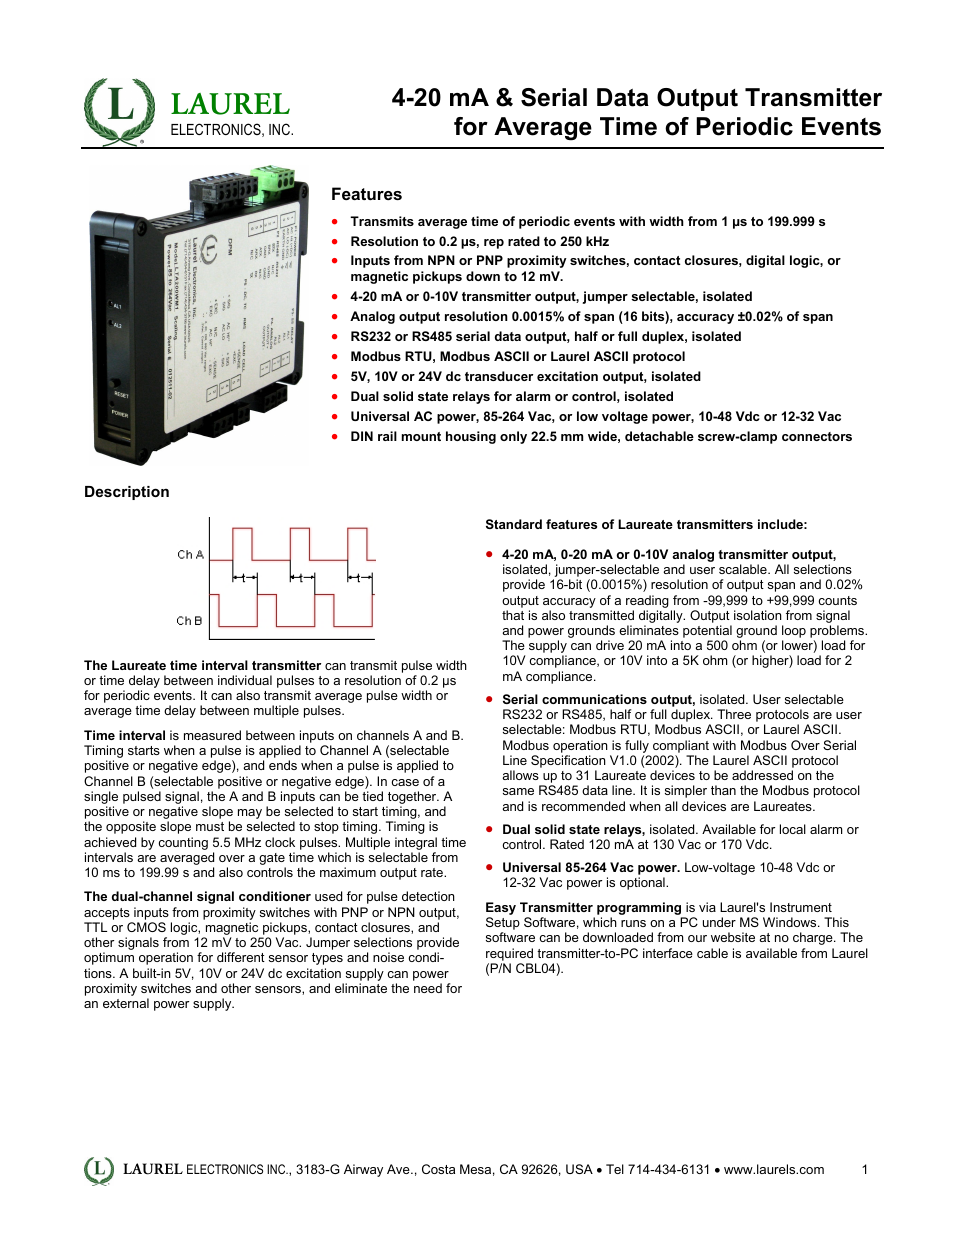 LT: 4-20 mA & Serial Data Output Transmitter for Average Time of Periodic Events